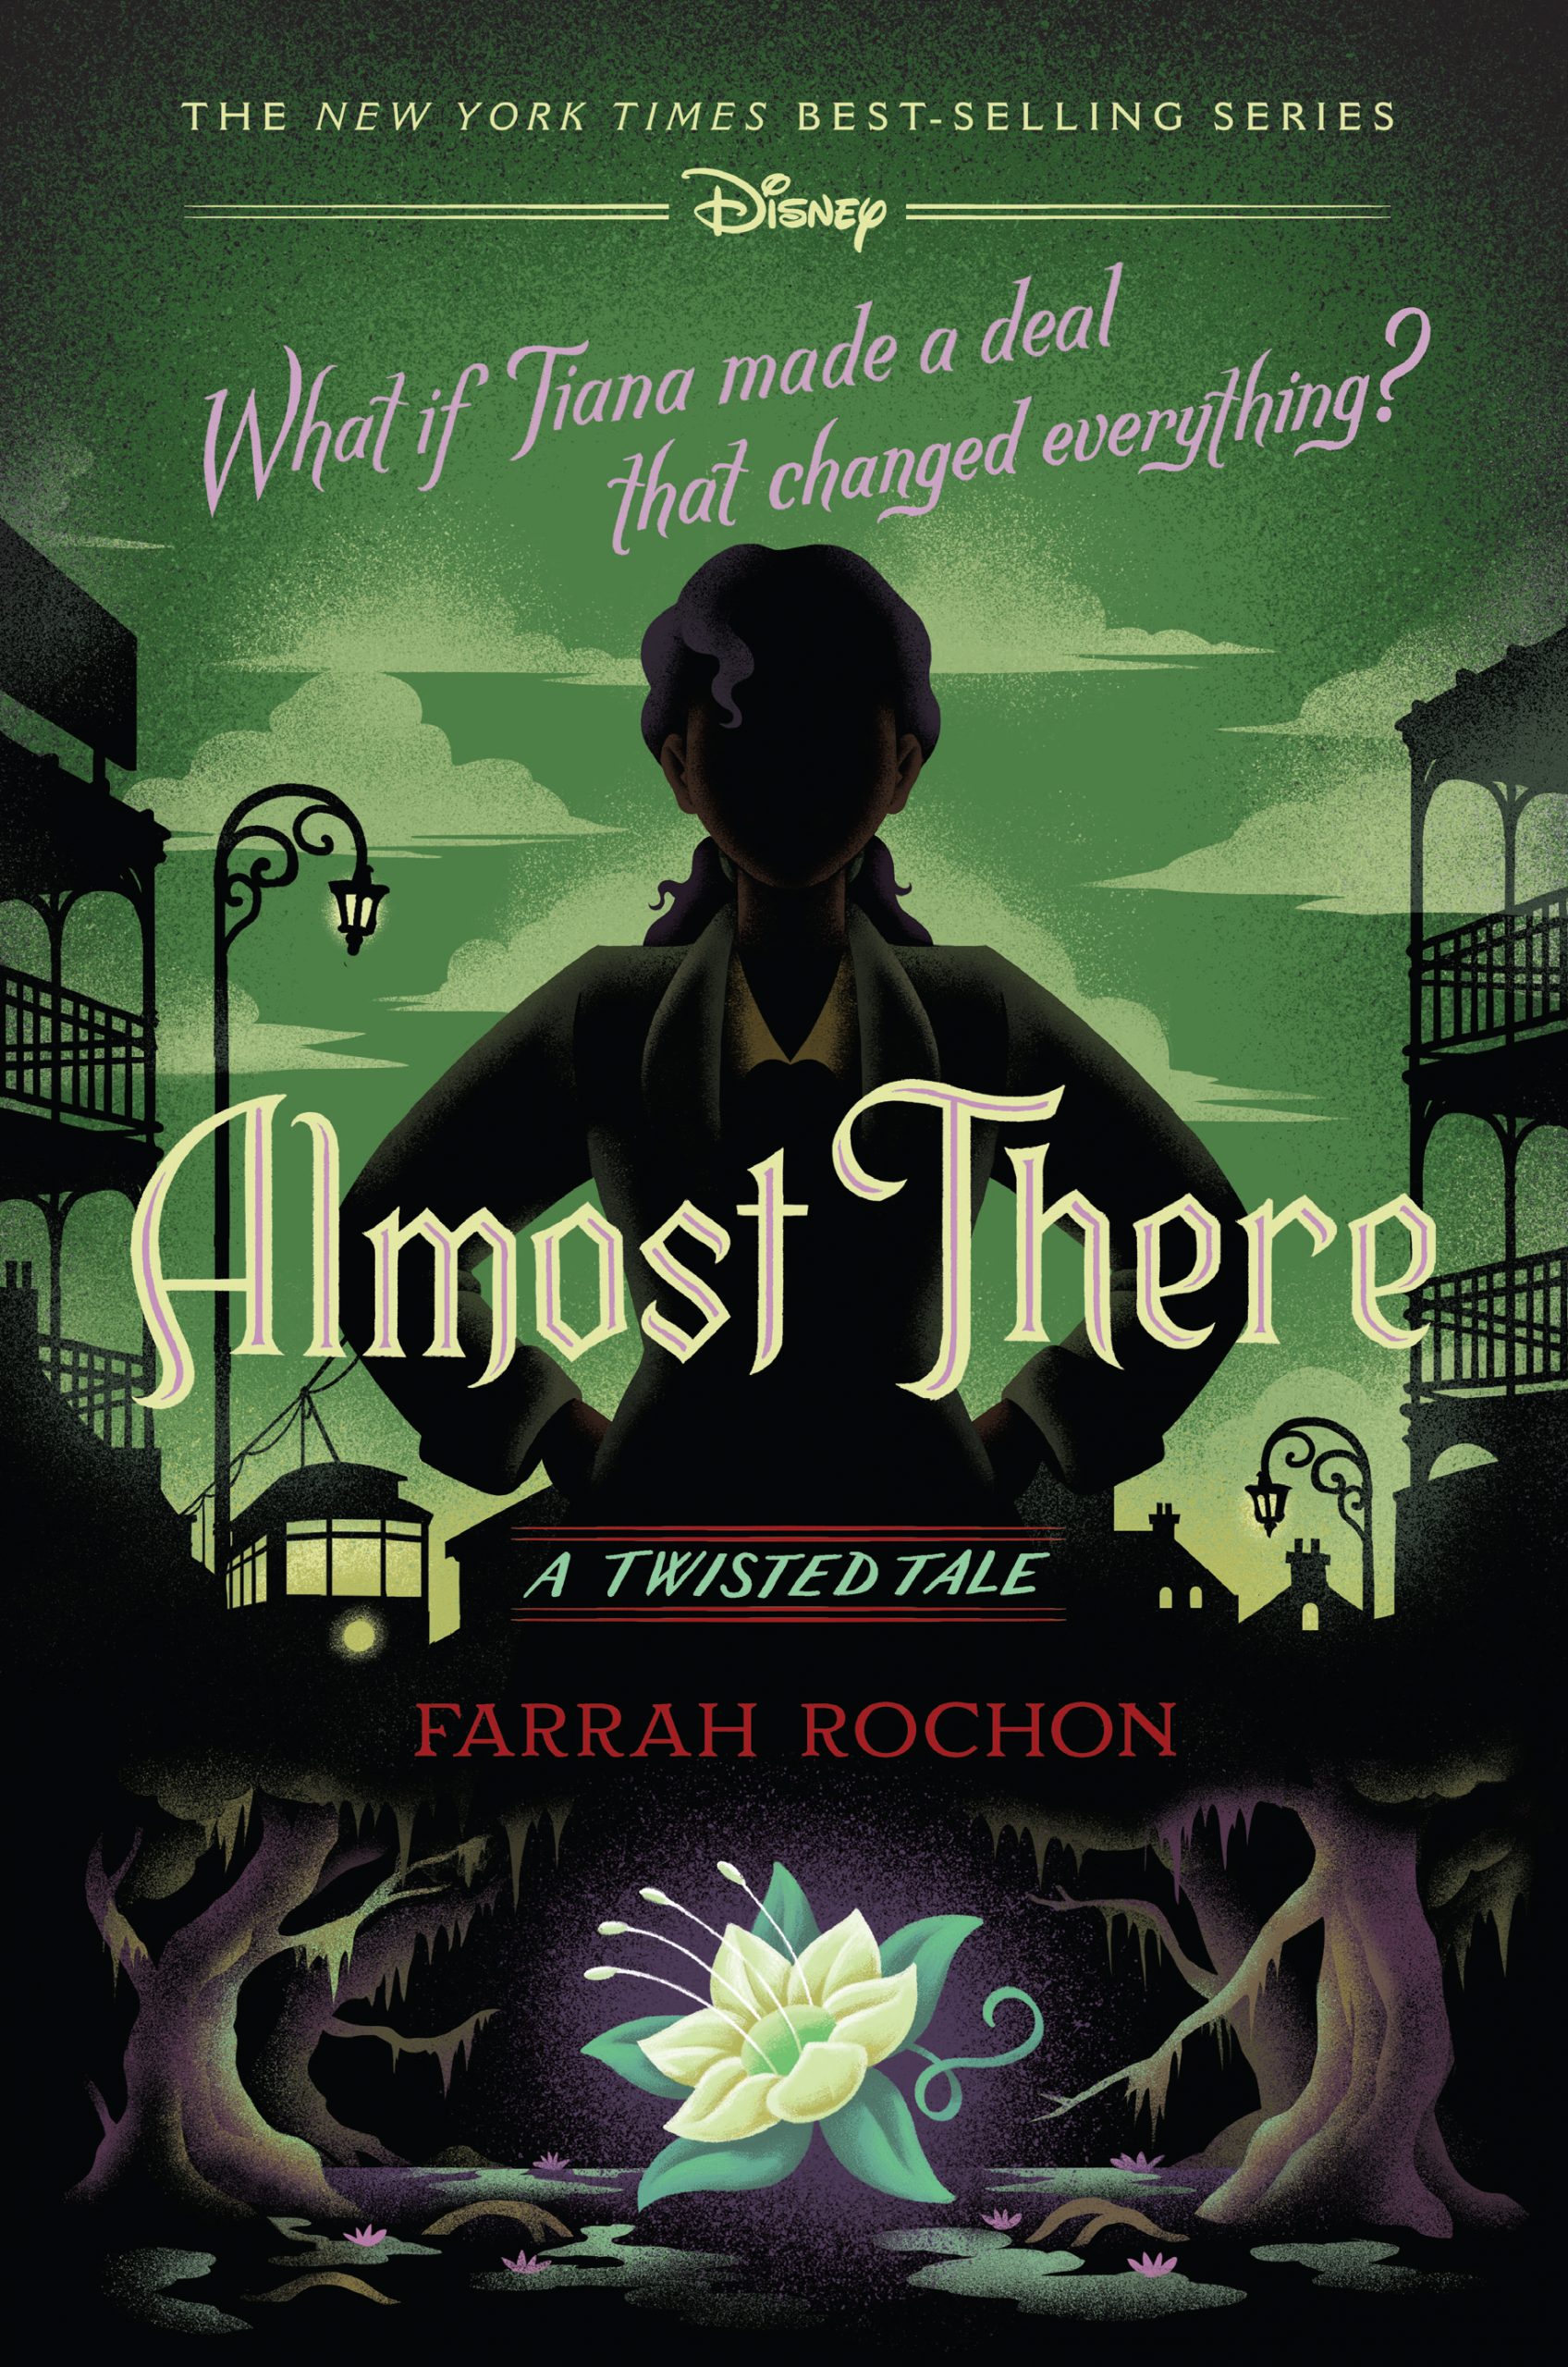 Almost There A Twisted Tale by Farrah Rochon - A Twisted Tale, Black  History Month - Princess, The Princess and the Frog Books